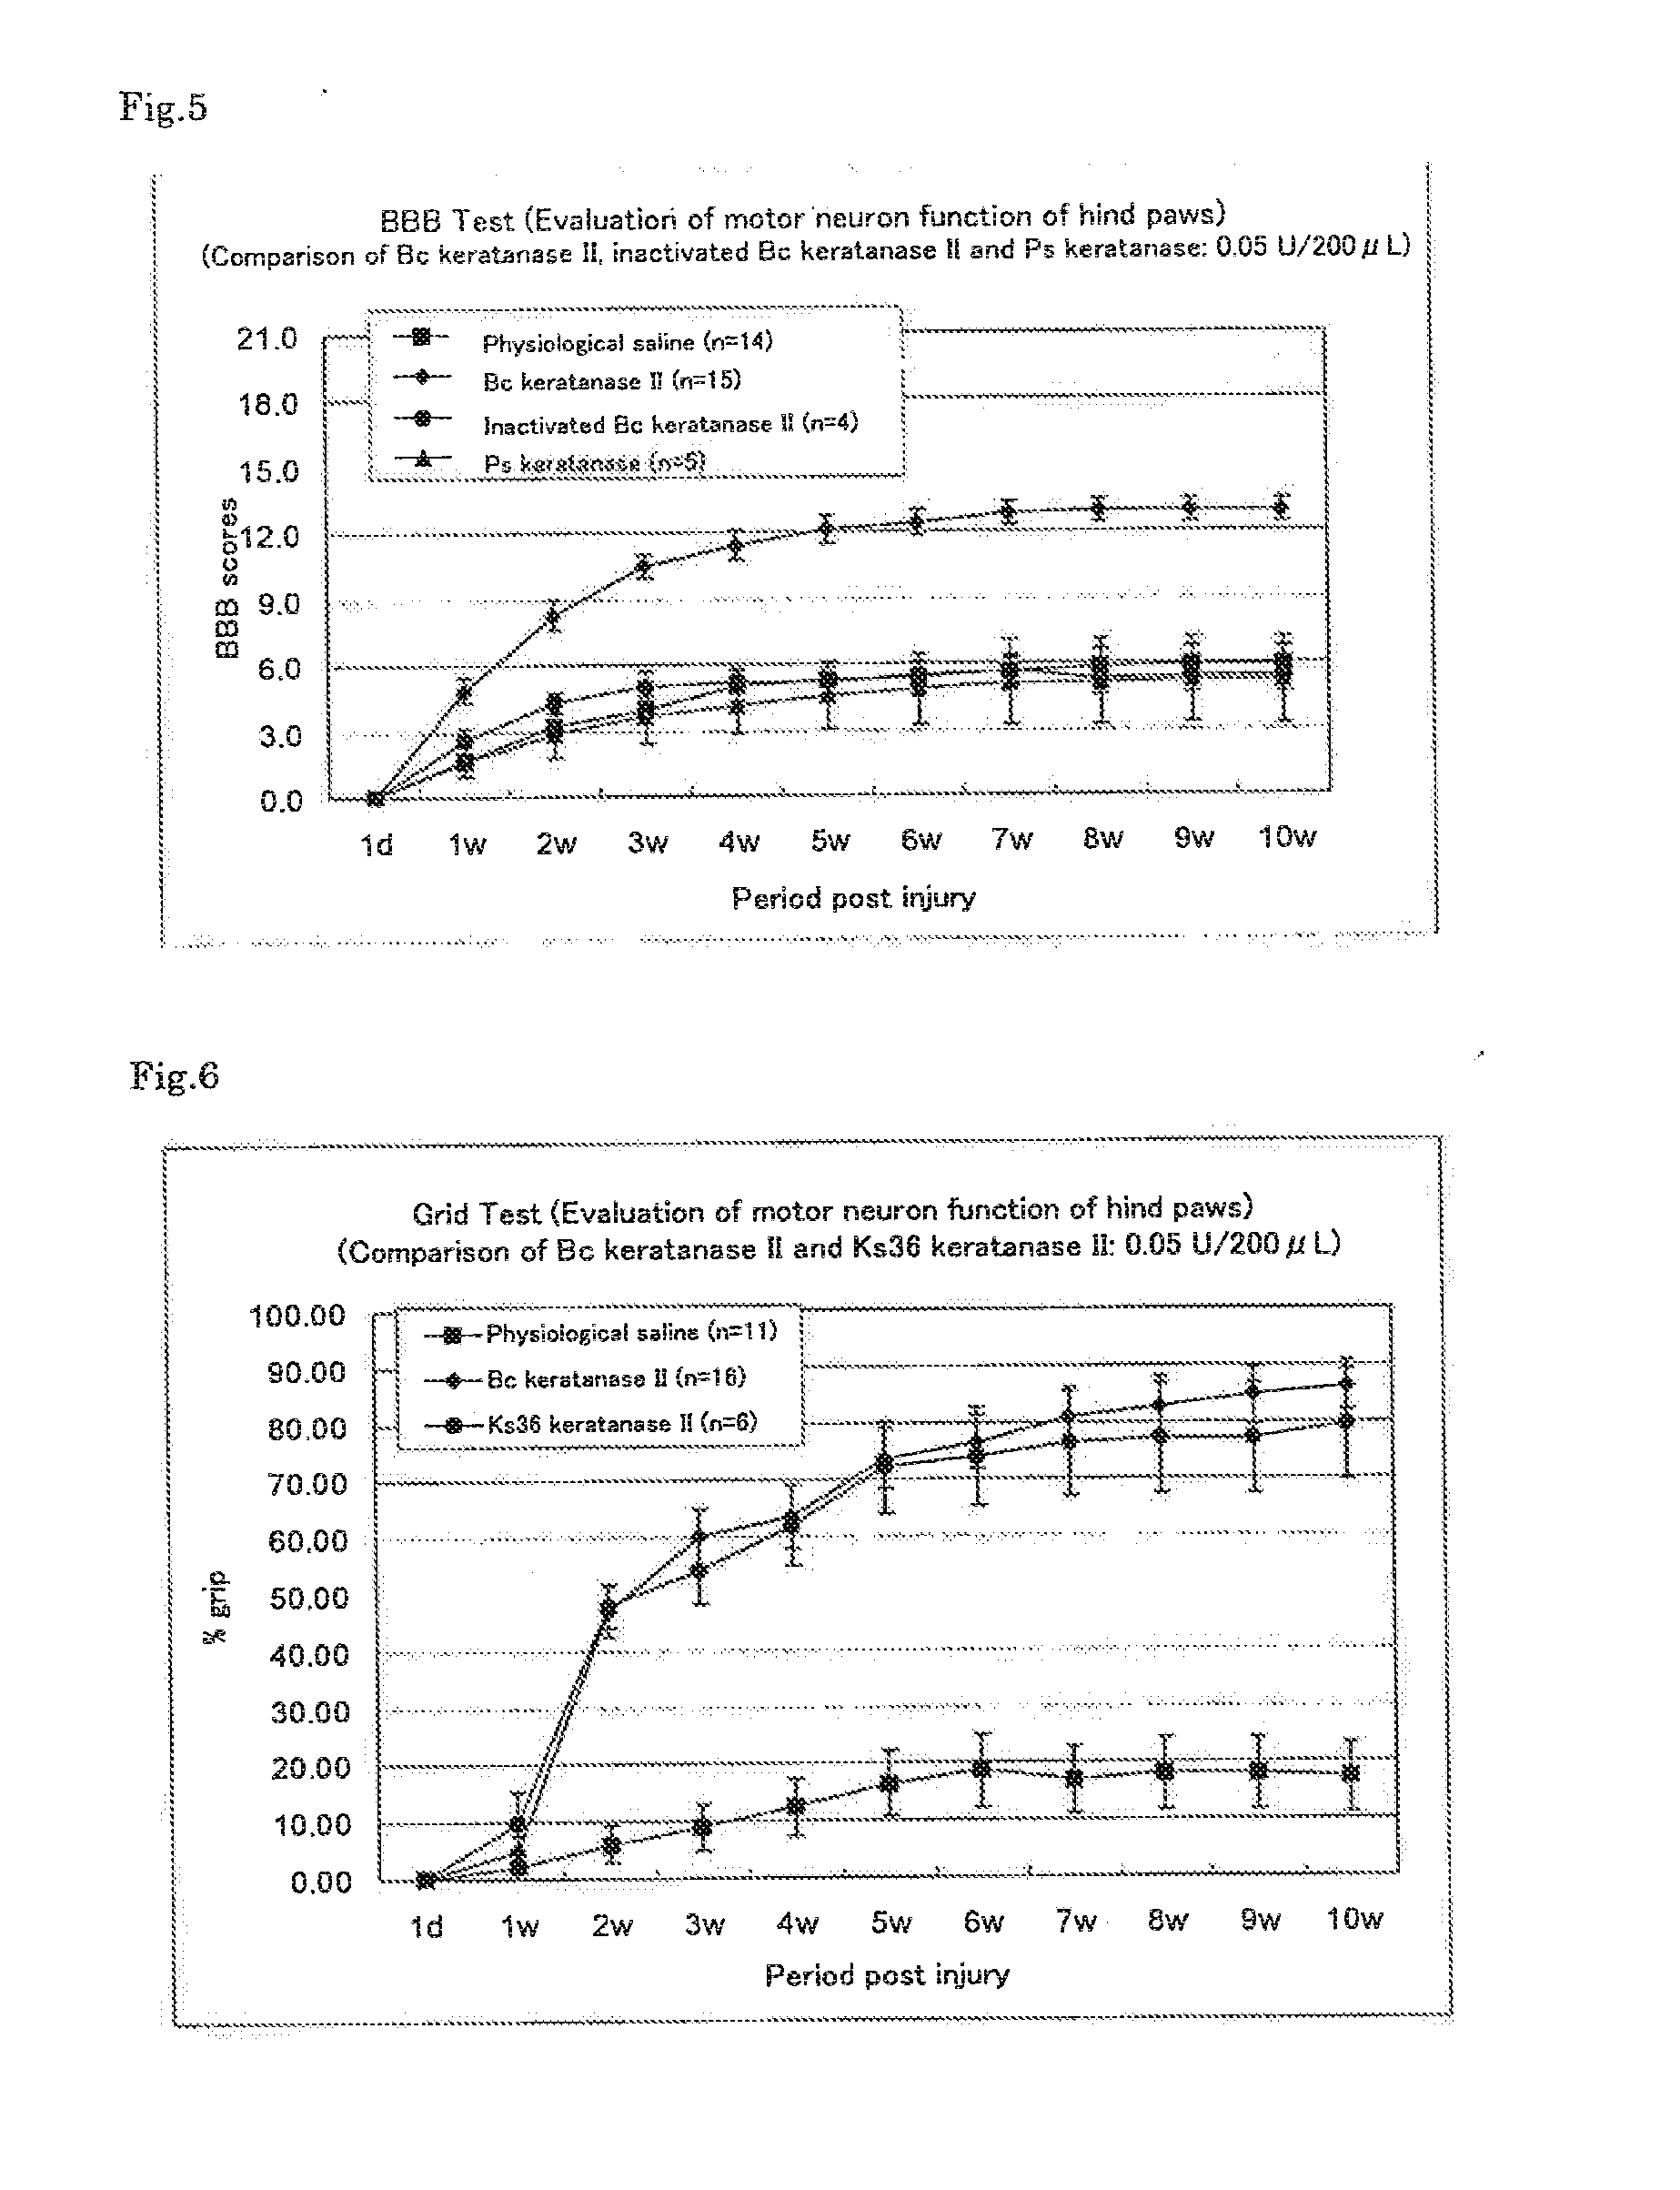 AGENT FOR DYSFUNCTION DUE TO NEUROPATHY AND Rho KINASE ACTIVATION INHIBITOR